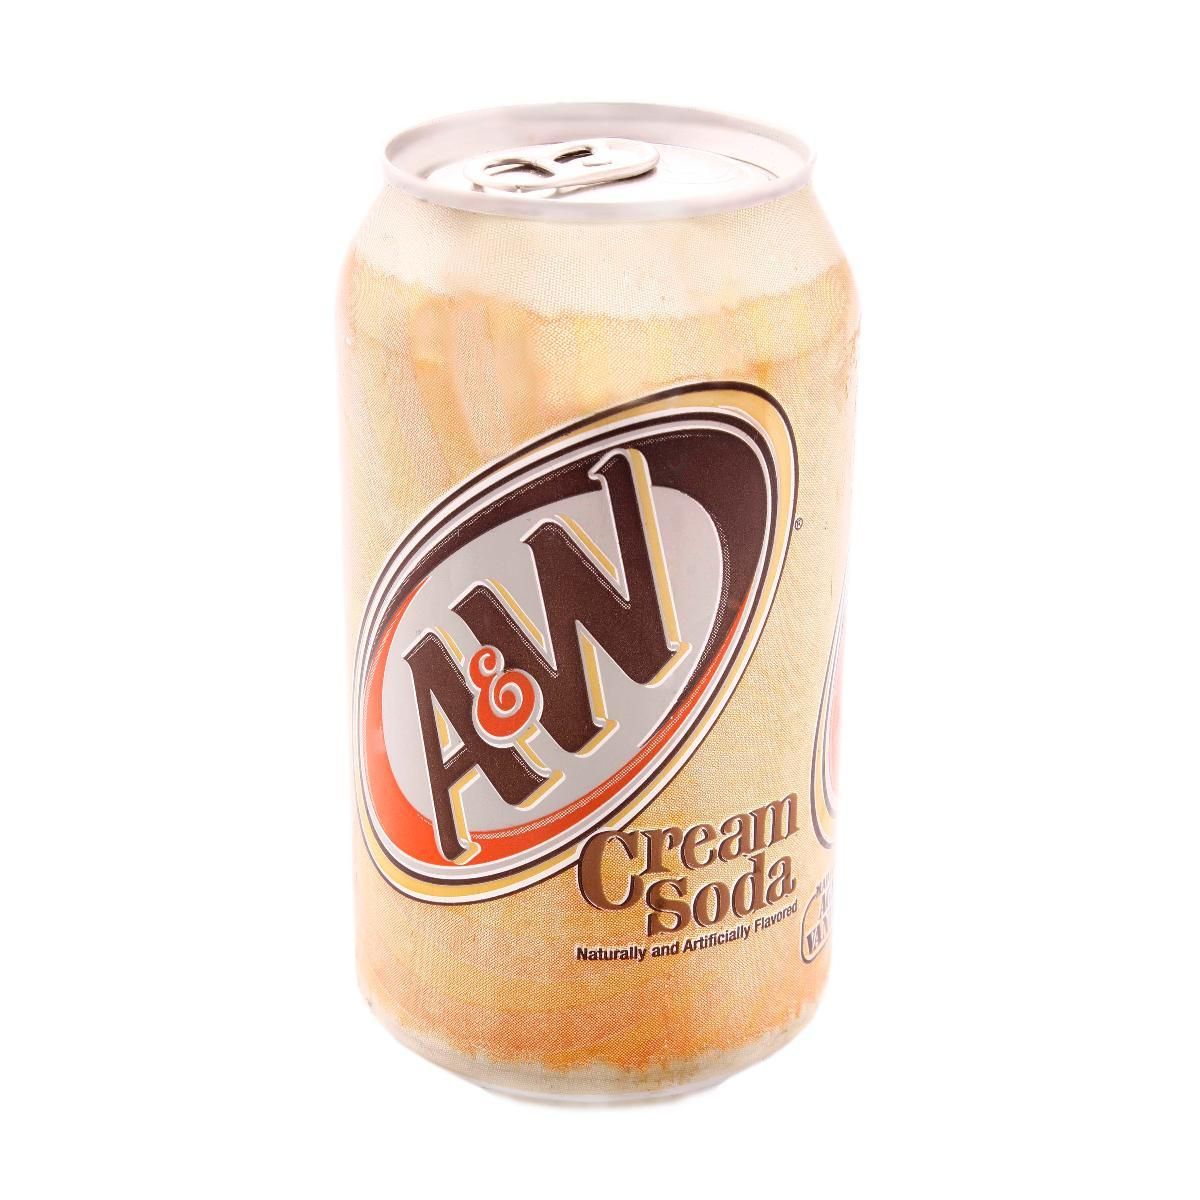 A&W Root beer Cream Soda